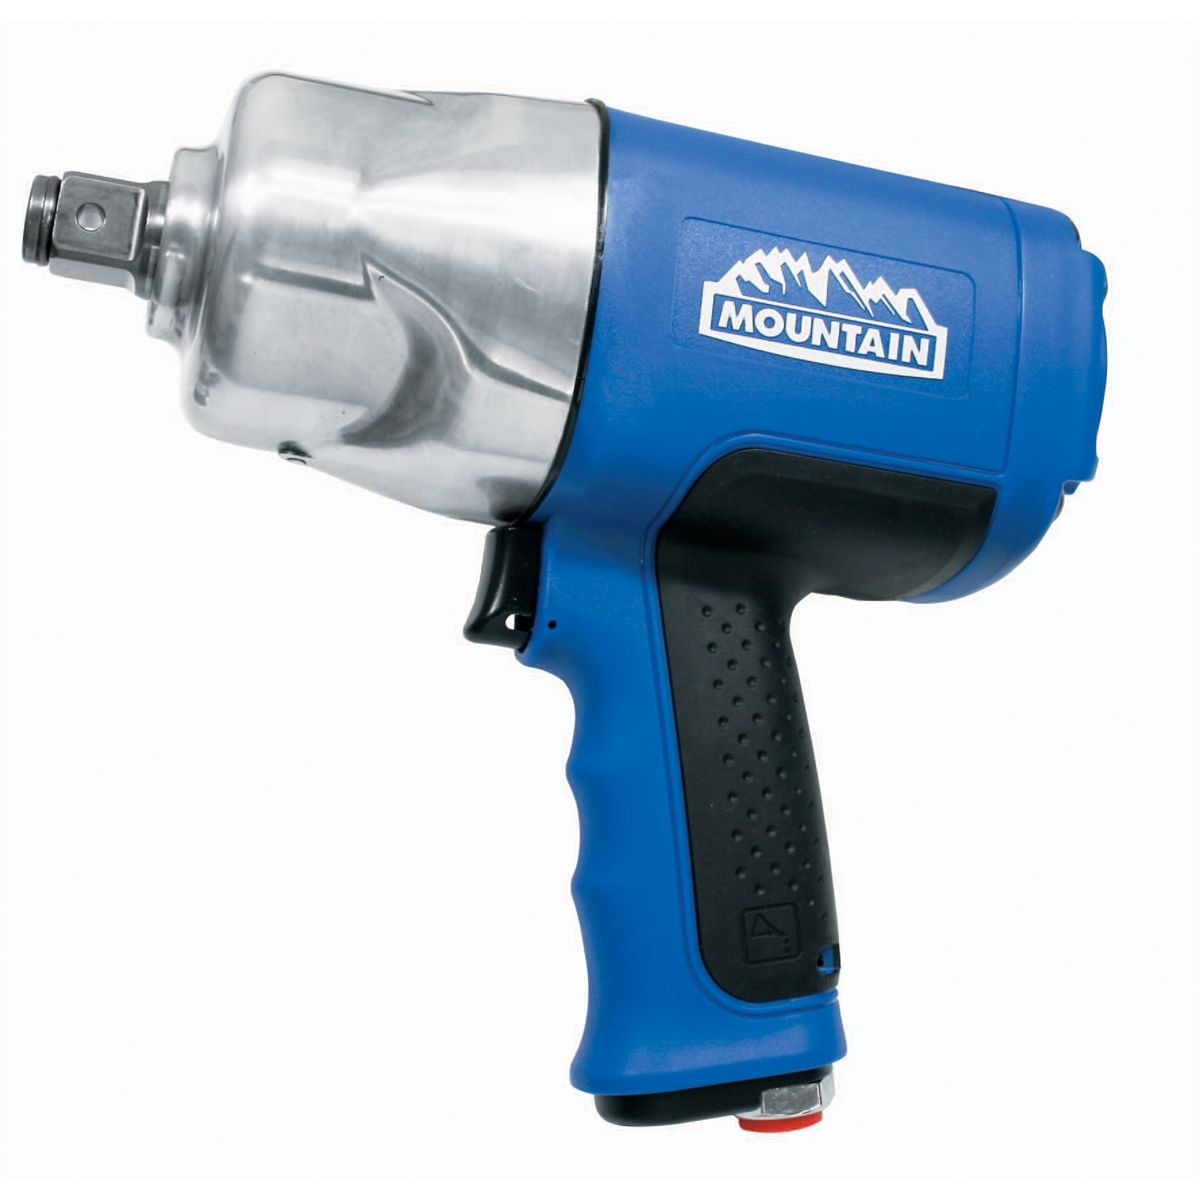 3/4" Drive Composite Impact Wrench 1150 ft-lbs